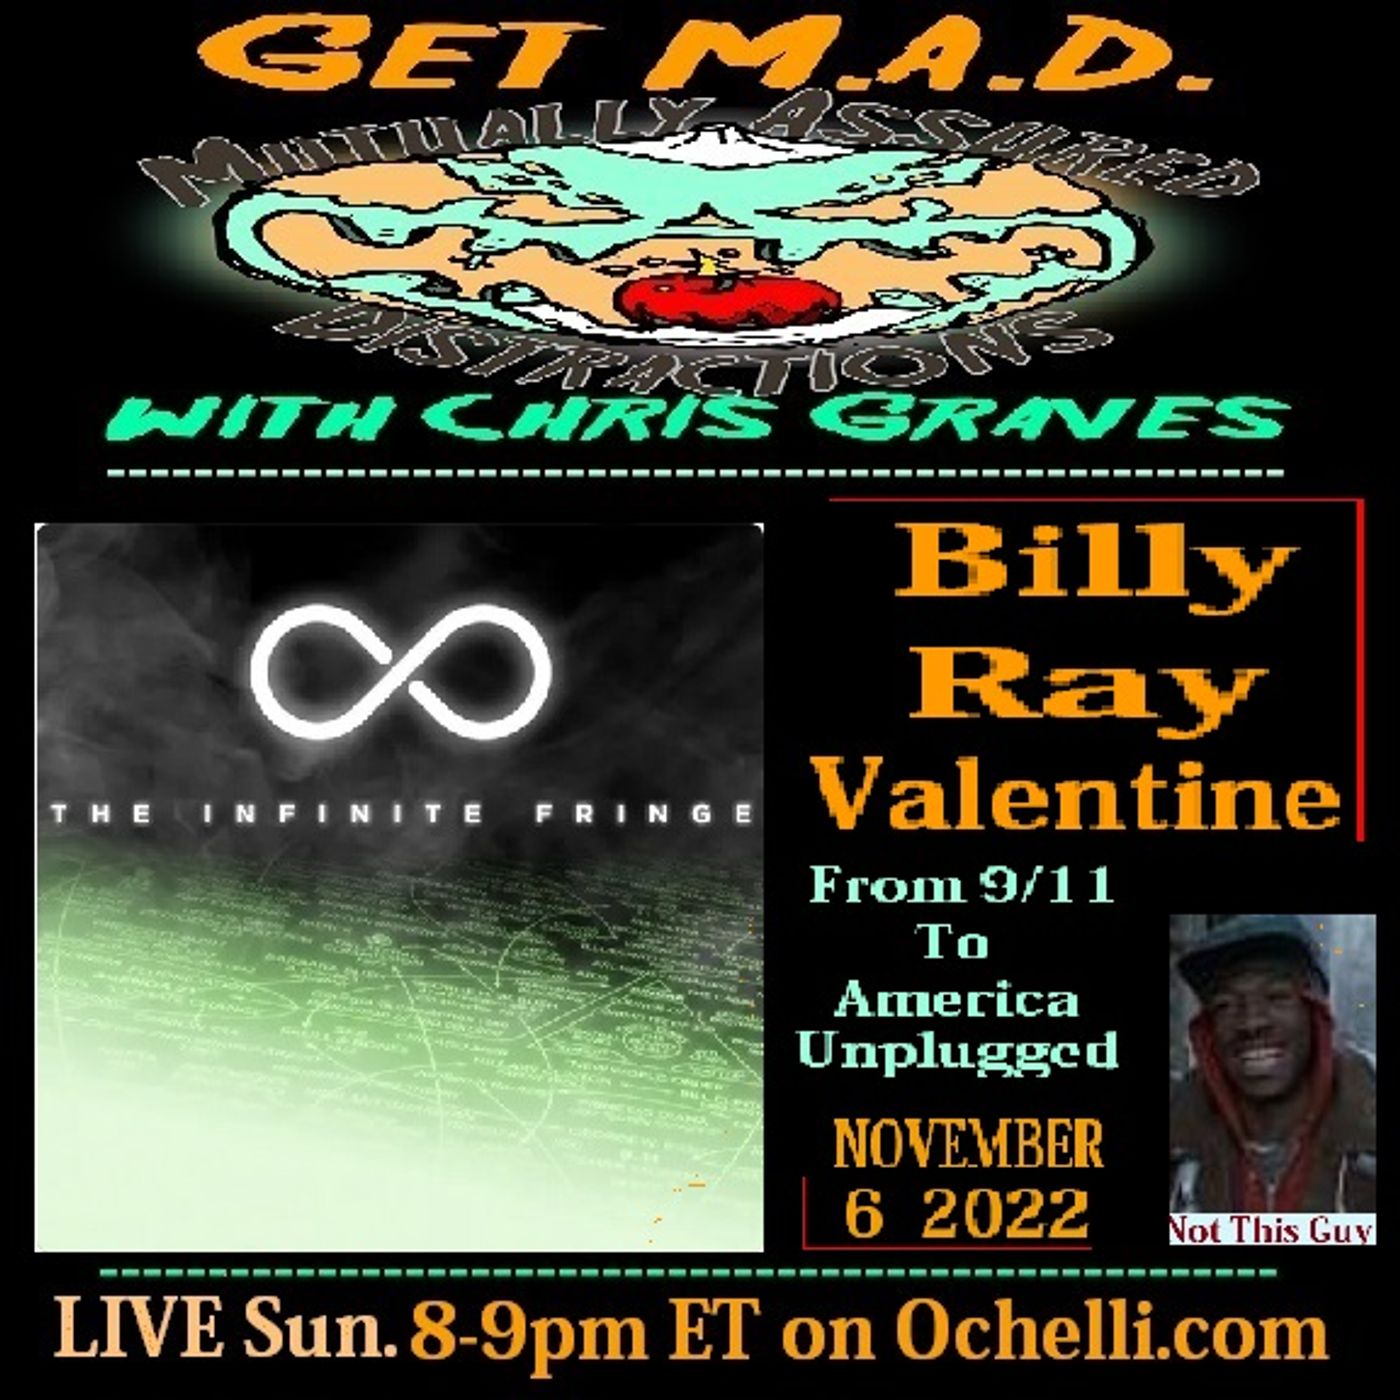 Get M A D with Chris Graves 11-6-2022 Billy Ray Valentine